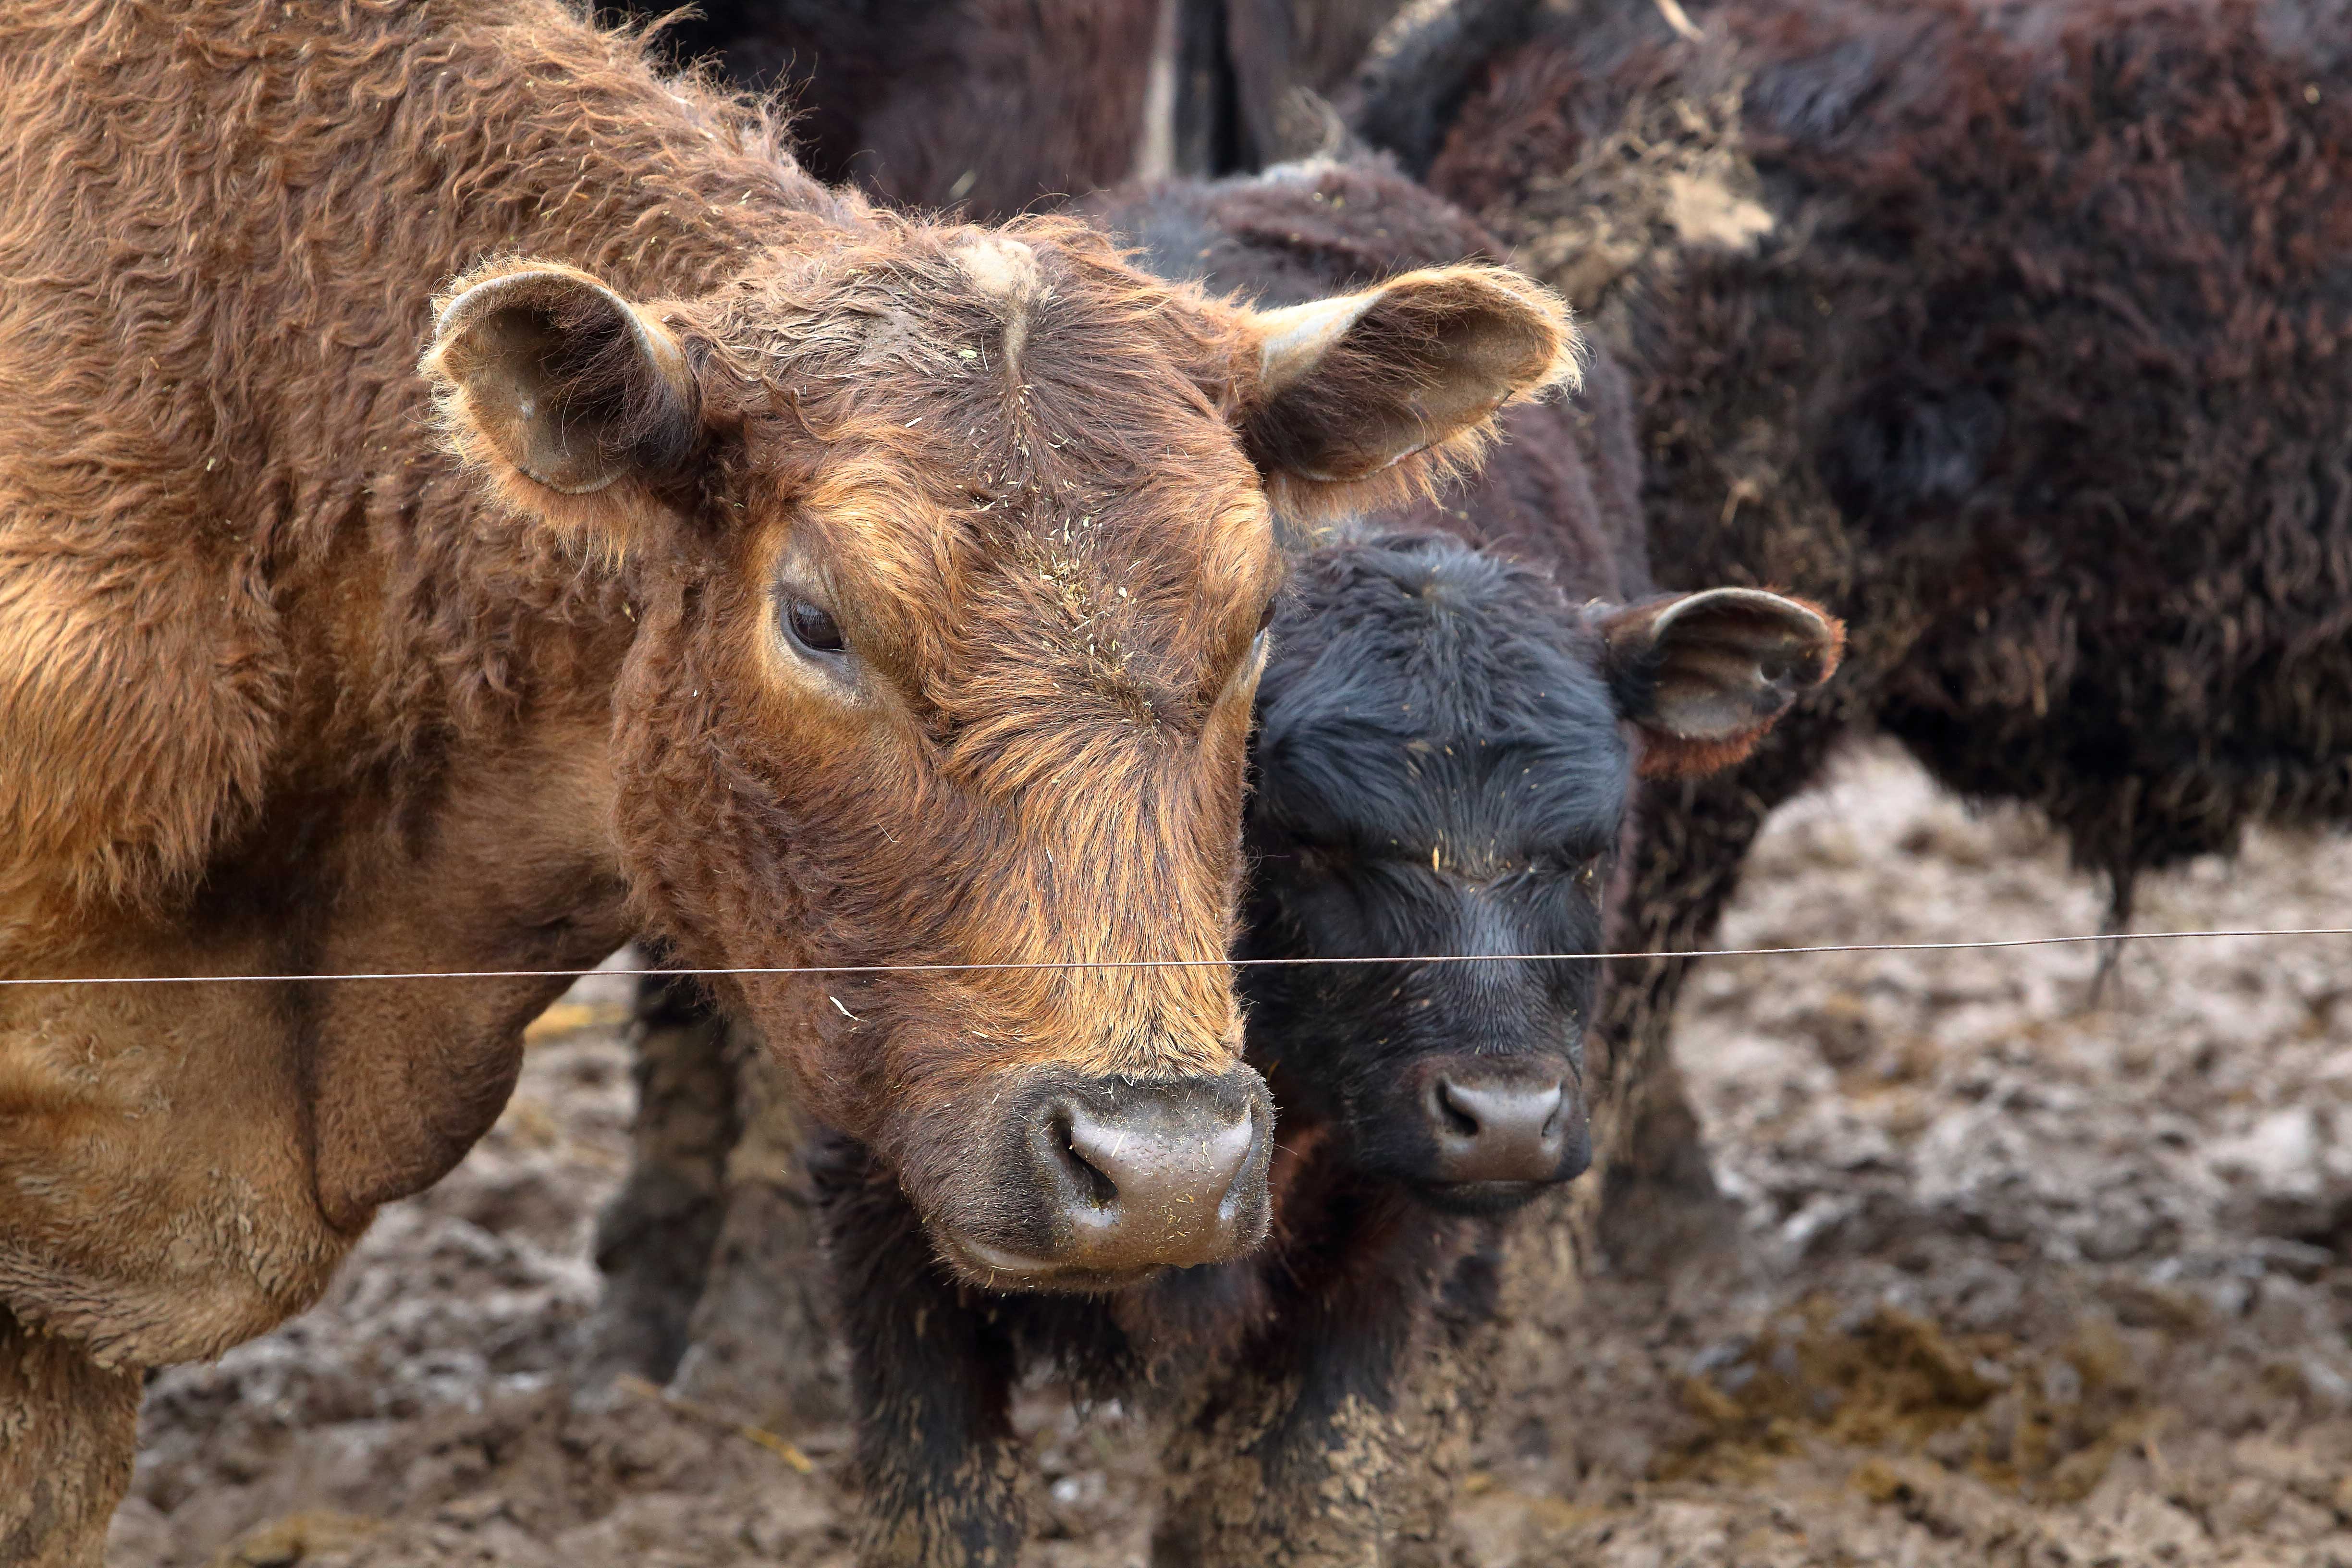 A brown cow and a black calf standing in a muddy, water-soaked feedlot.